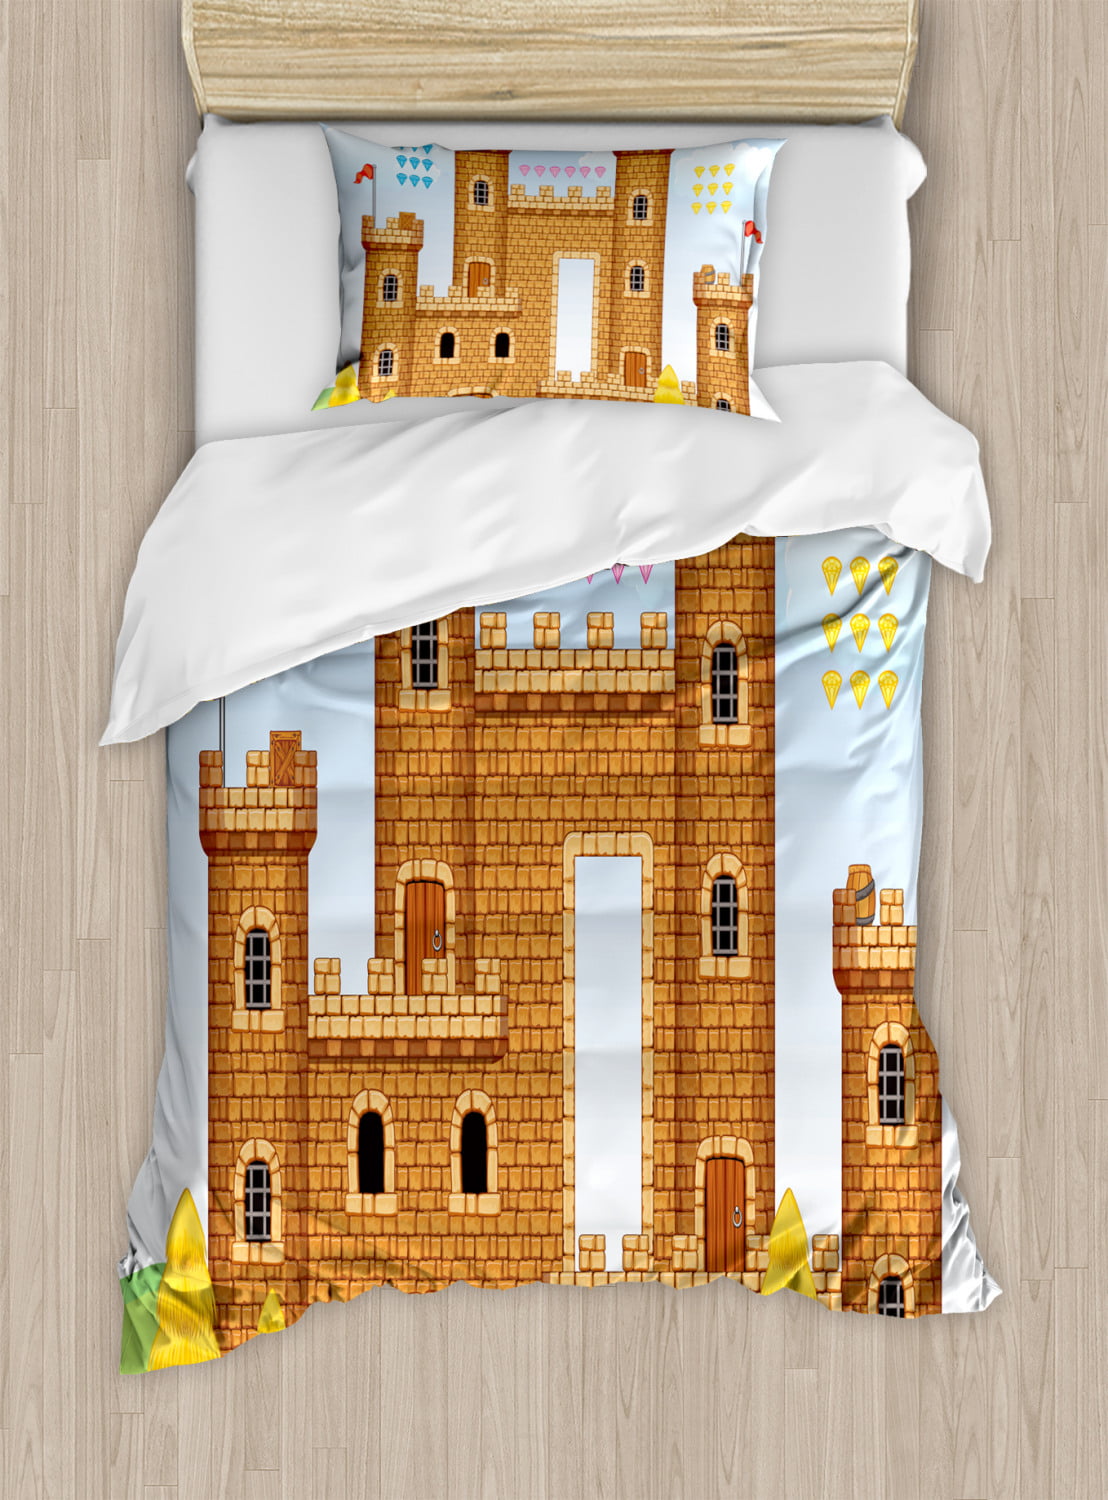 Children Duvet Cover Set Video Game Background With Castle